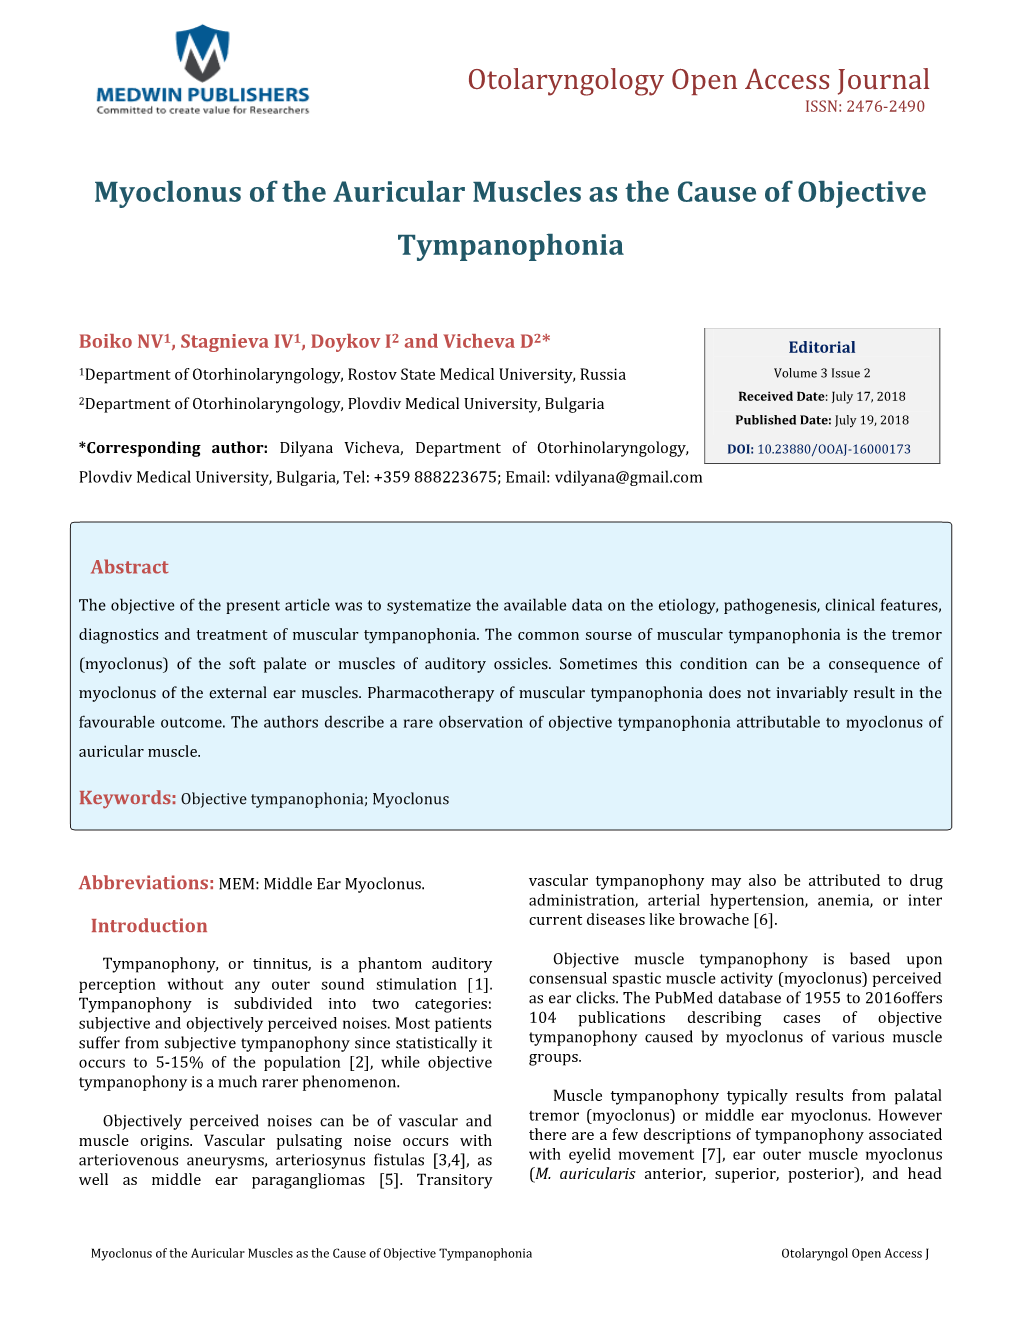 Myoclonus of the Auricular Muscles As the Cause of Objective Tympanophonia